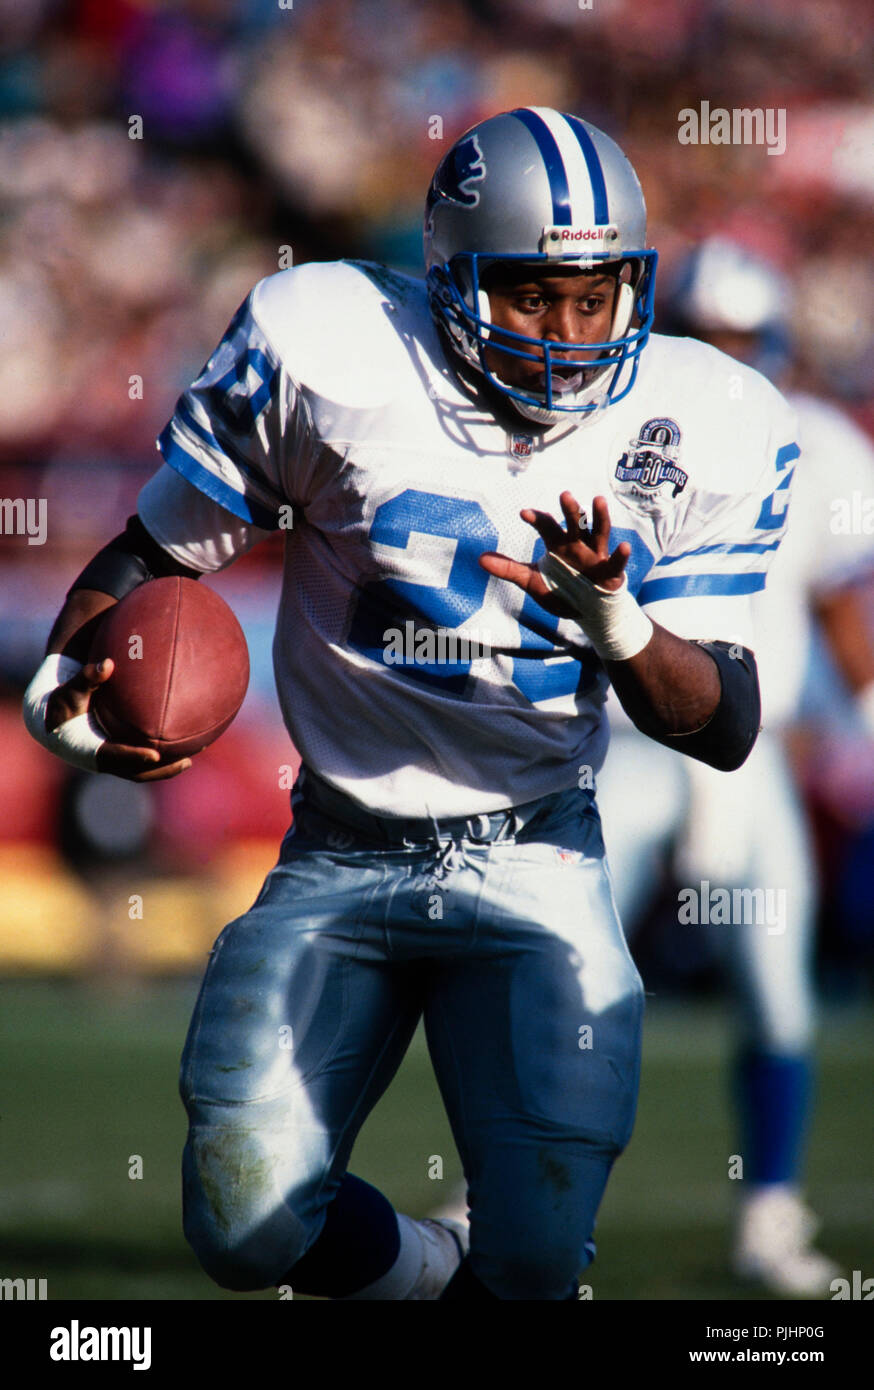 Detroit Lions Hall of Fame NFL running back Barry Sanders evades tacklers during a football game  against the Green Bay Packers in 1993. Stock Photo